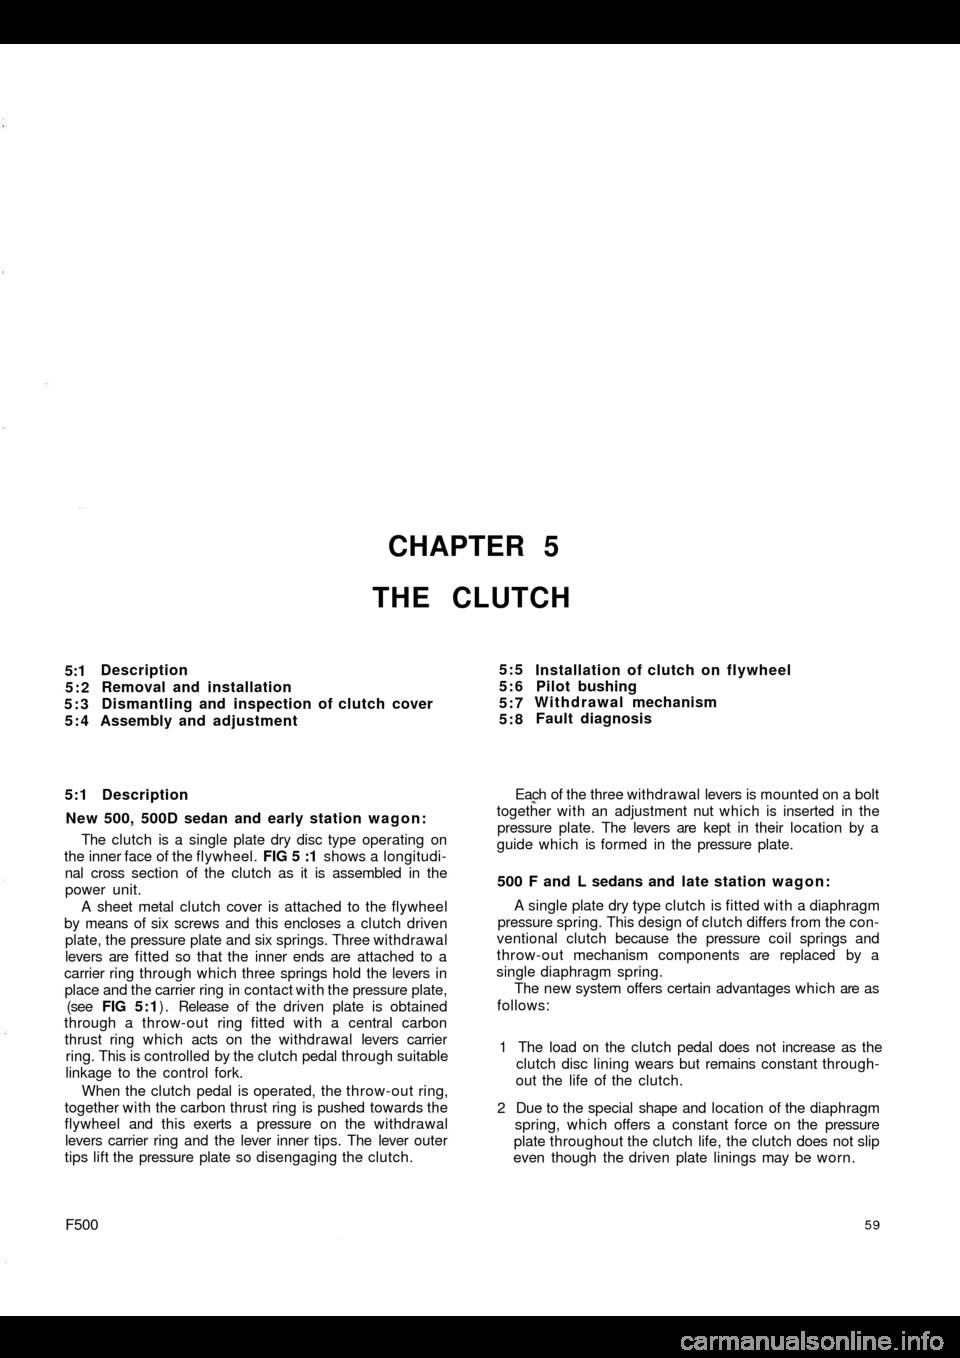 FIAT 500 1971 1.G Workshop Manual CHAPTER 5
THE CLUTCH
5:1
5:2
5:3
5:4Description
Removal and installation
Dismantling and inspection of clutch cover
Assembly and adjustment
5:1 Description
New 500, 500D sedan and early station wagon: